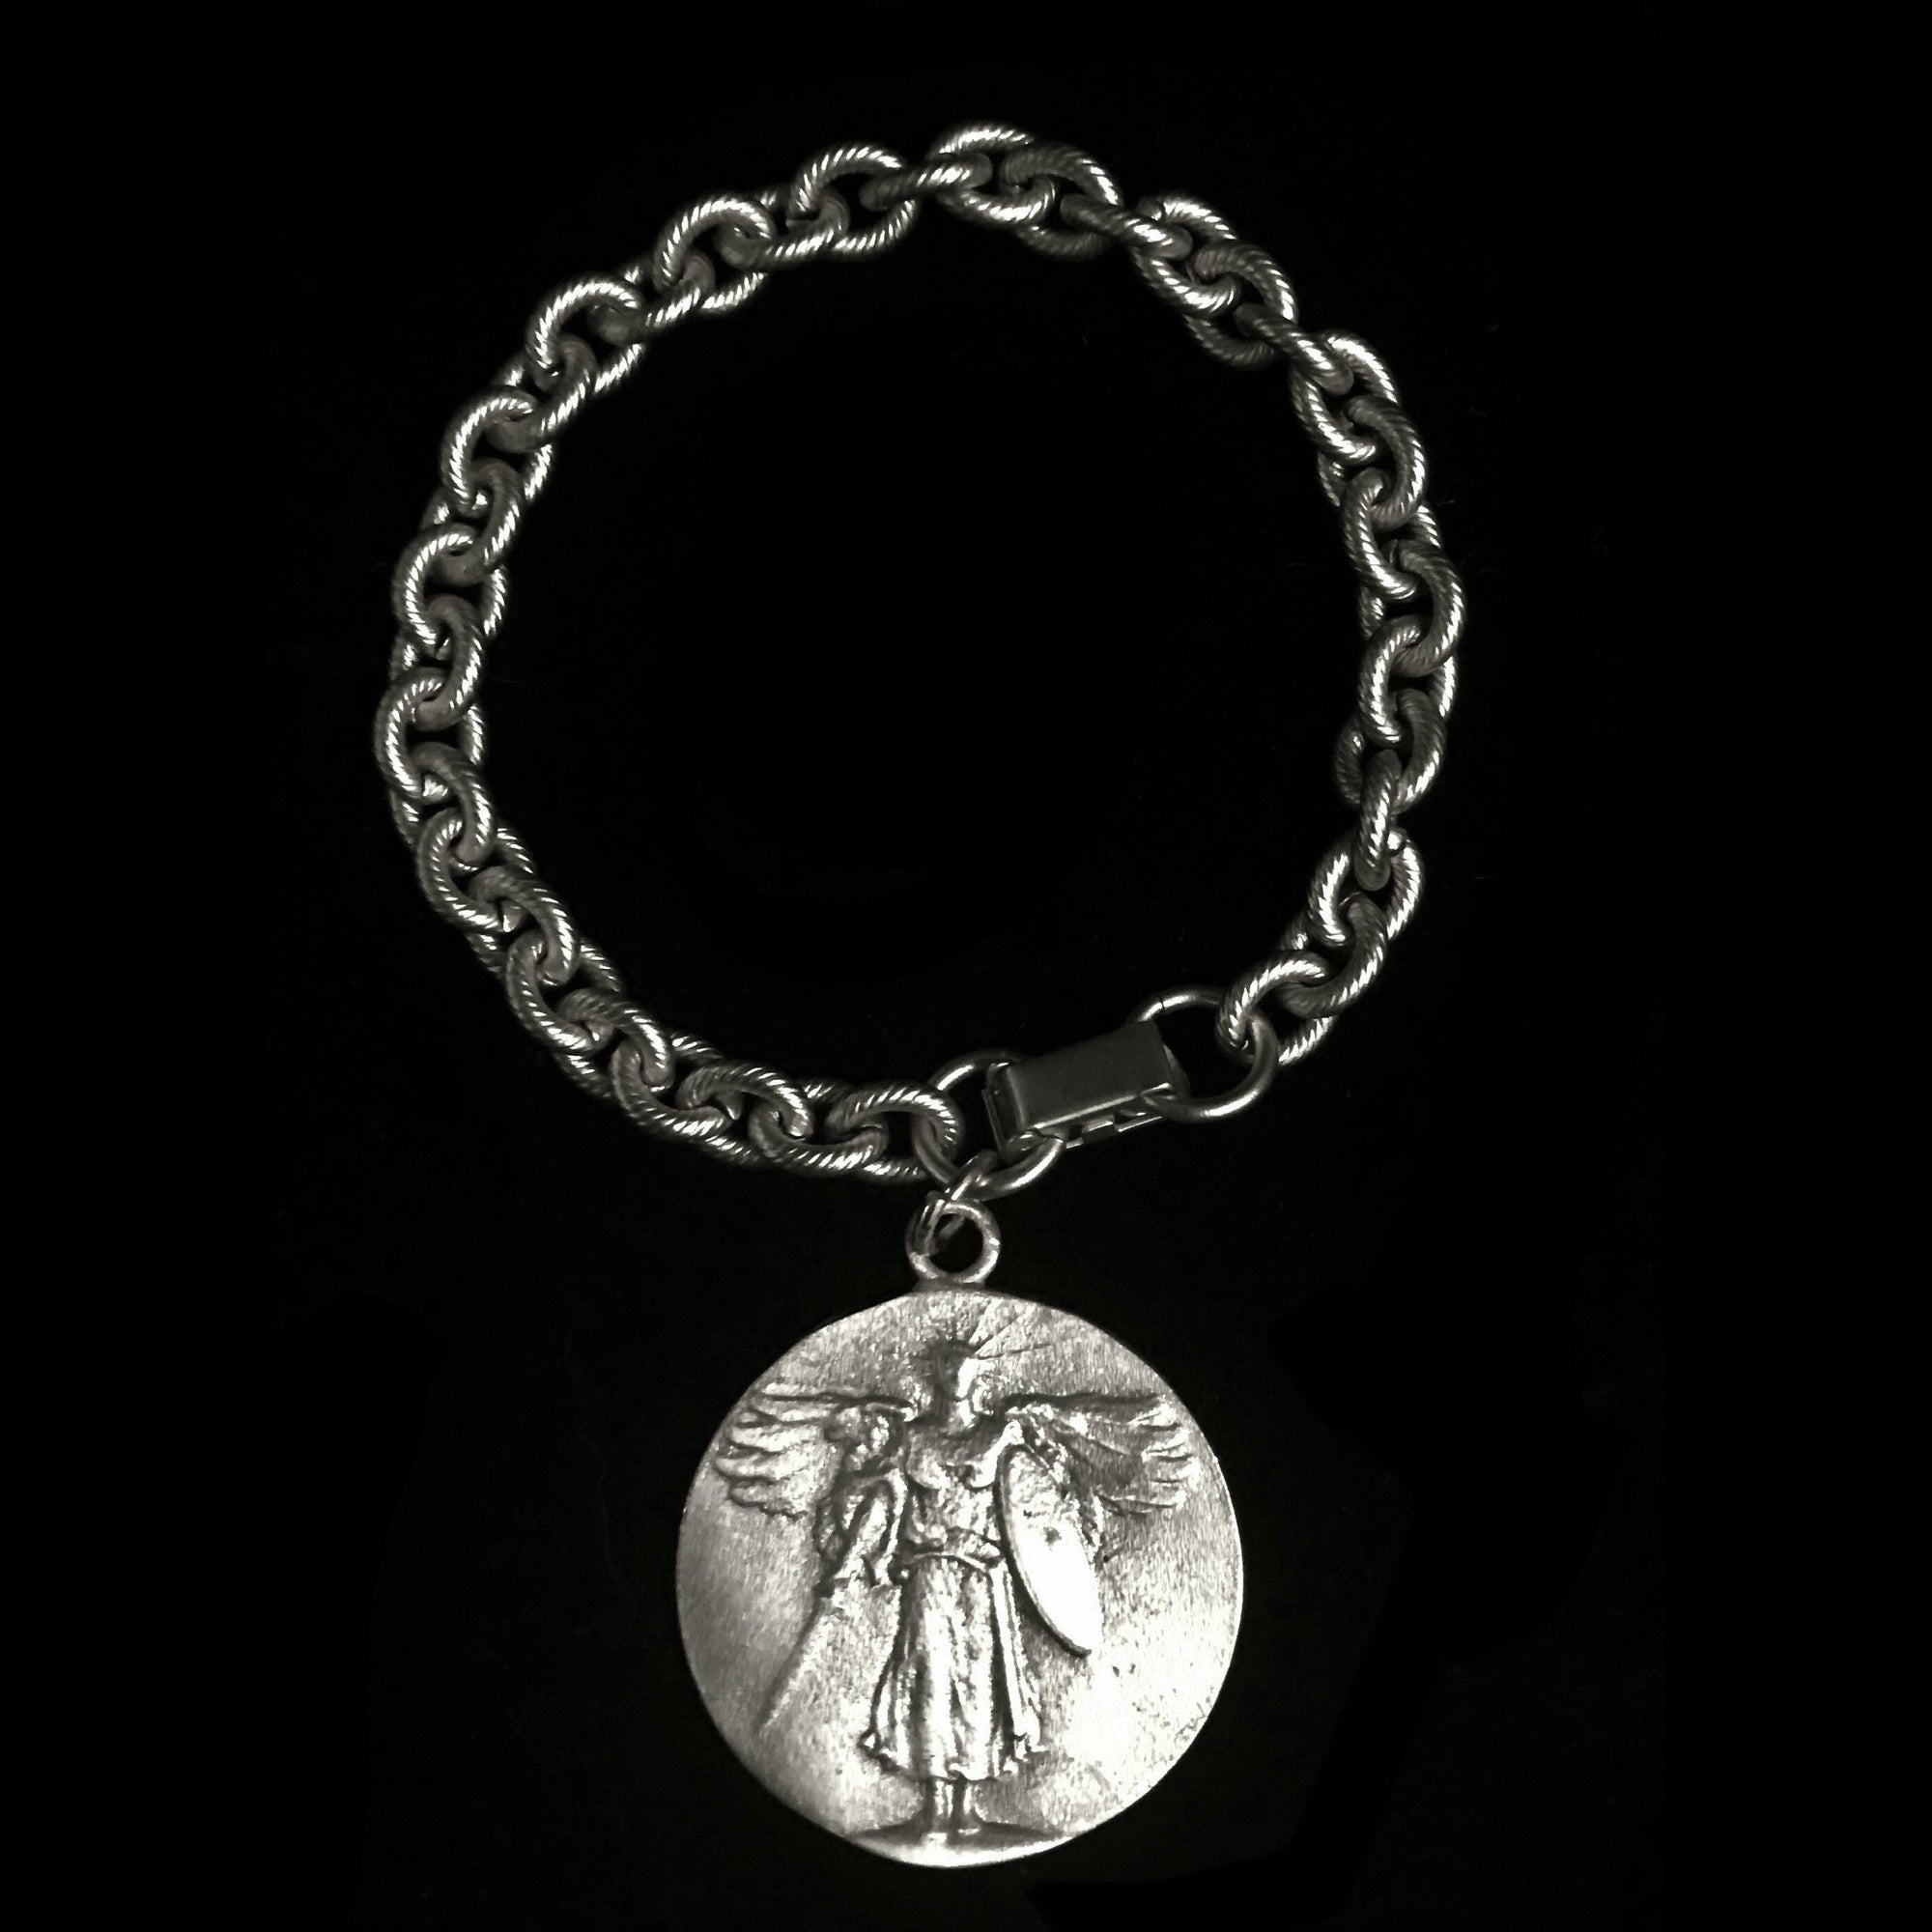 Saint Michael Victory Cable Link Bracelet by Whispering Goddess - Silver